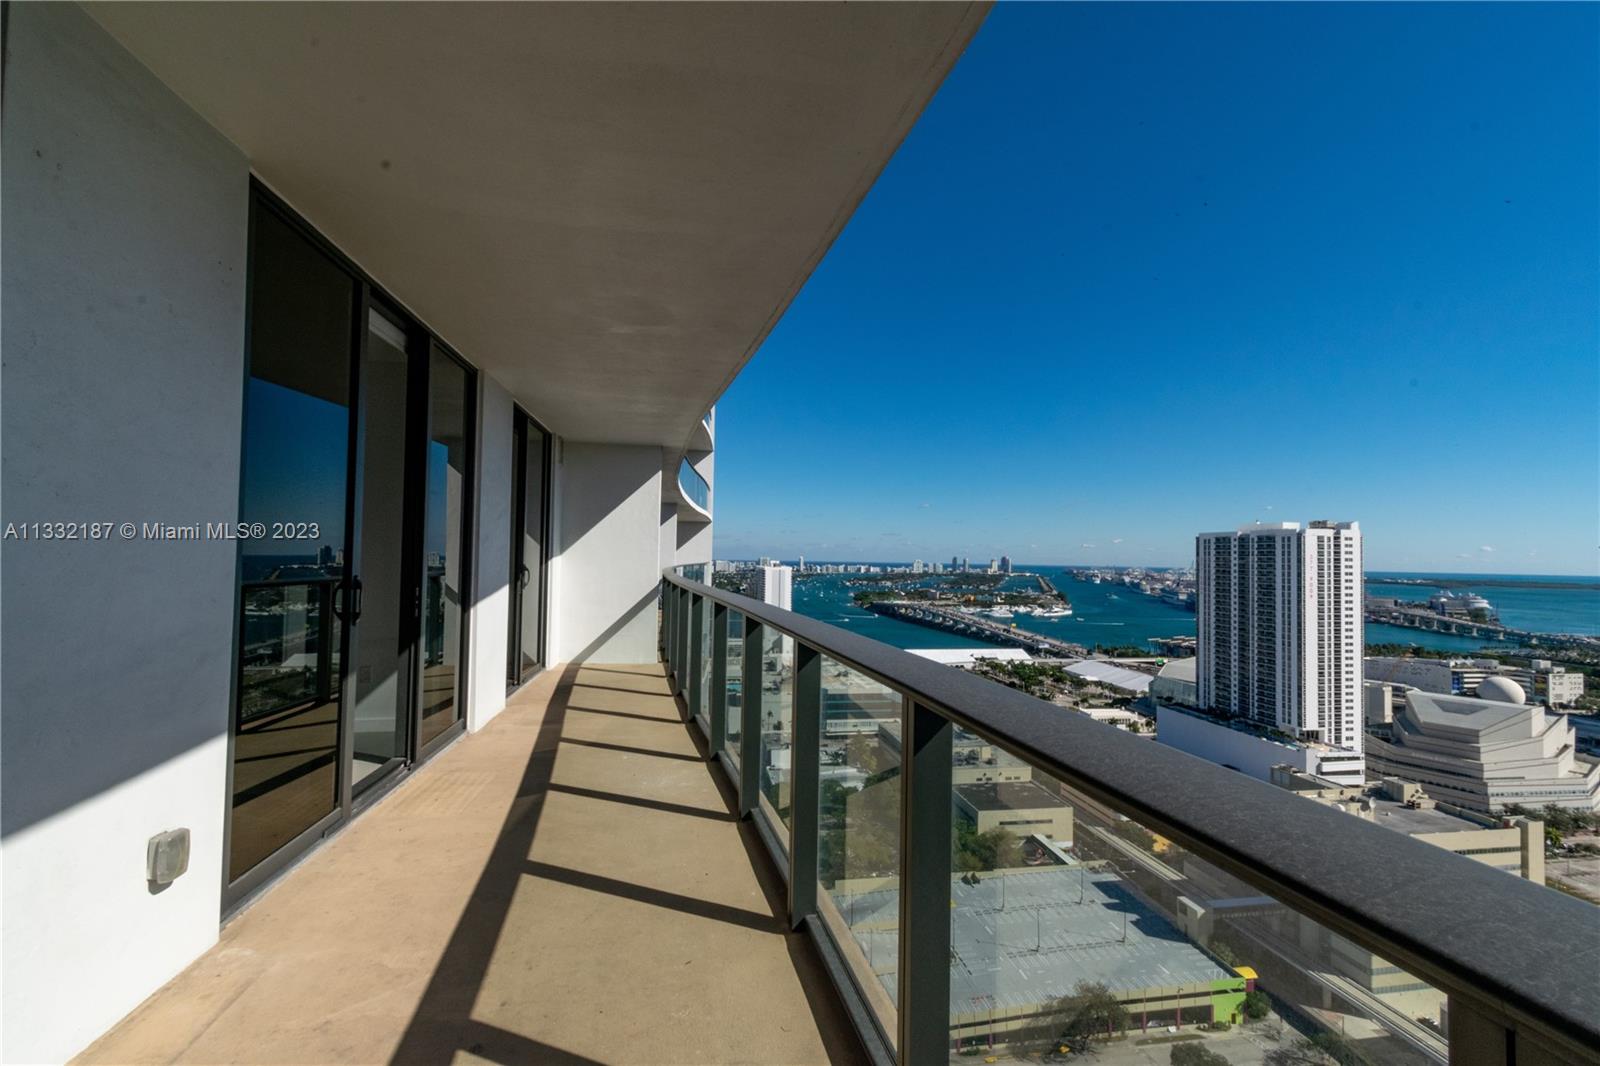 Breathtaking views of the City and Biscayne Bay . This 2/2 unit has the best layout in the building with a split 2 bedrooms with 2 full bath. Washer and Dryer inside the unit, Full open kitchen with Isle and a full windows from floor to roof. Excellent Light. CANVAS building is strategicalley located in the 1 block away from Metromover station, and blocks away from Wynwood, Downtown, and Midtown. Building has sate of the art amenities Gym, Yoga room, Massage room, Theater, 2 pools on 9th floor and 1 pool on top roof. Business Center with Desks and High Speed wifi, Racket court. Pets playground, Social room,  and Sauna.